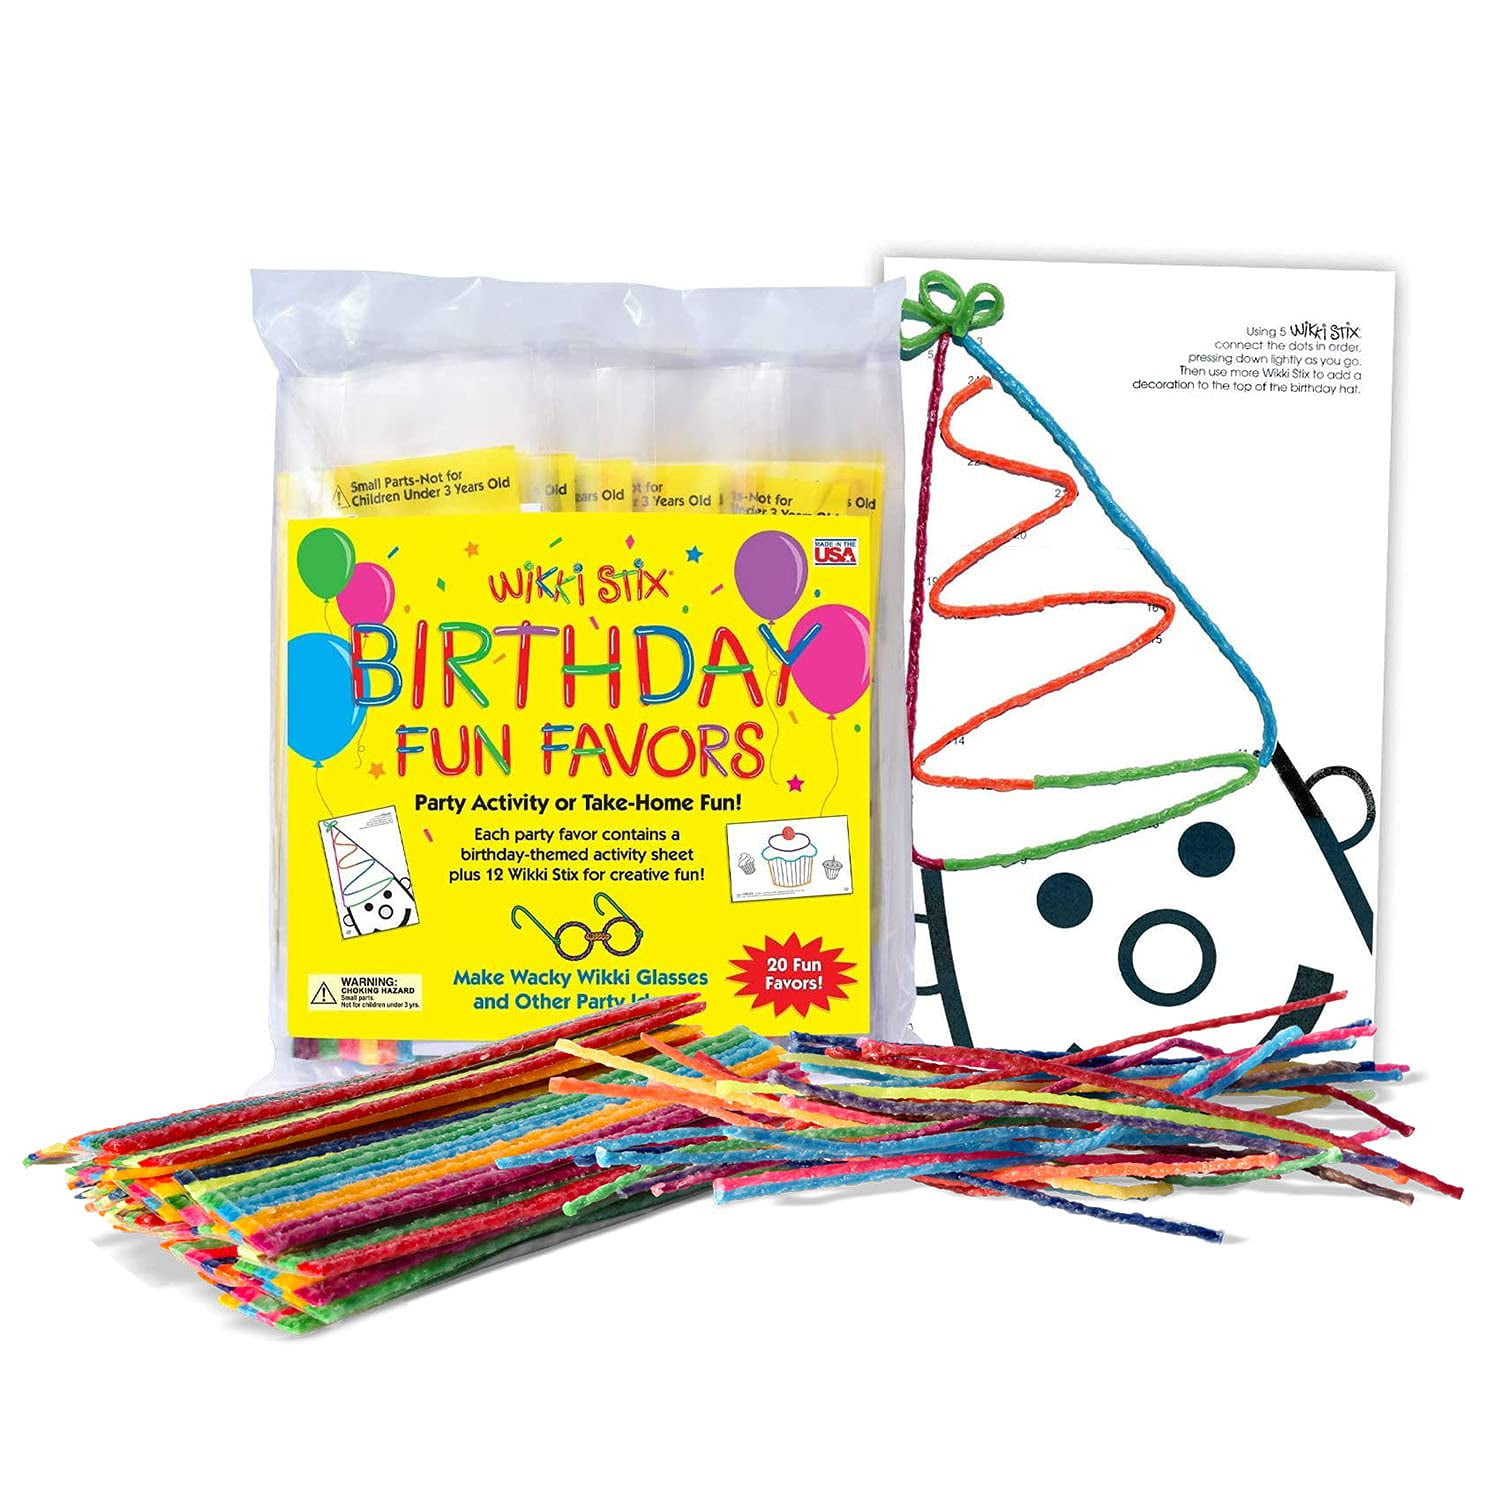 Wikki Stix Birthday Fun Favors, pack of 20 individual fun favors, each with  12 and a birthday themed play sheet, Made in the USA